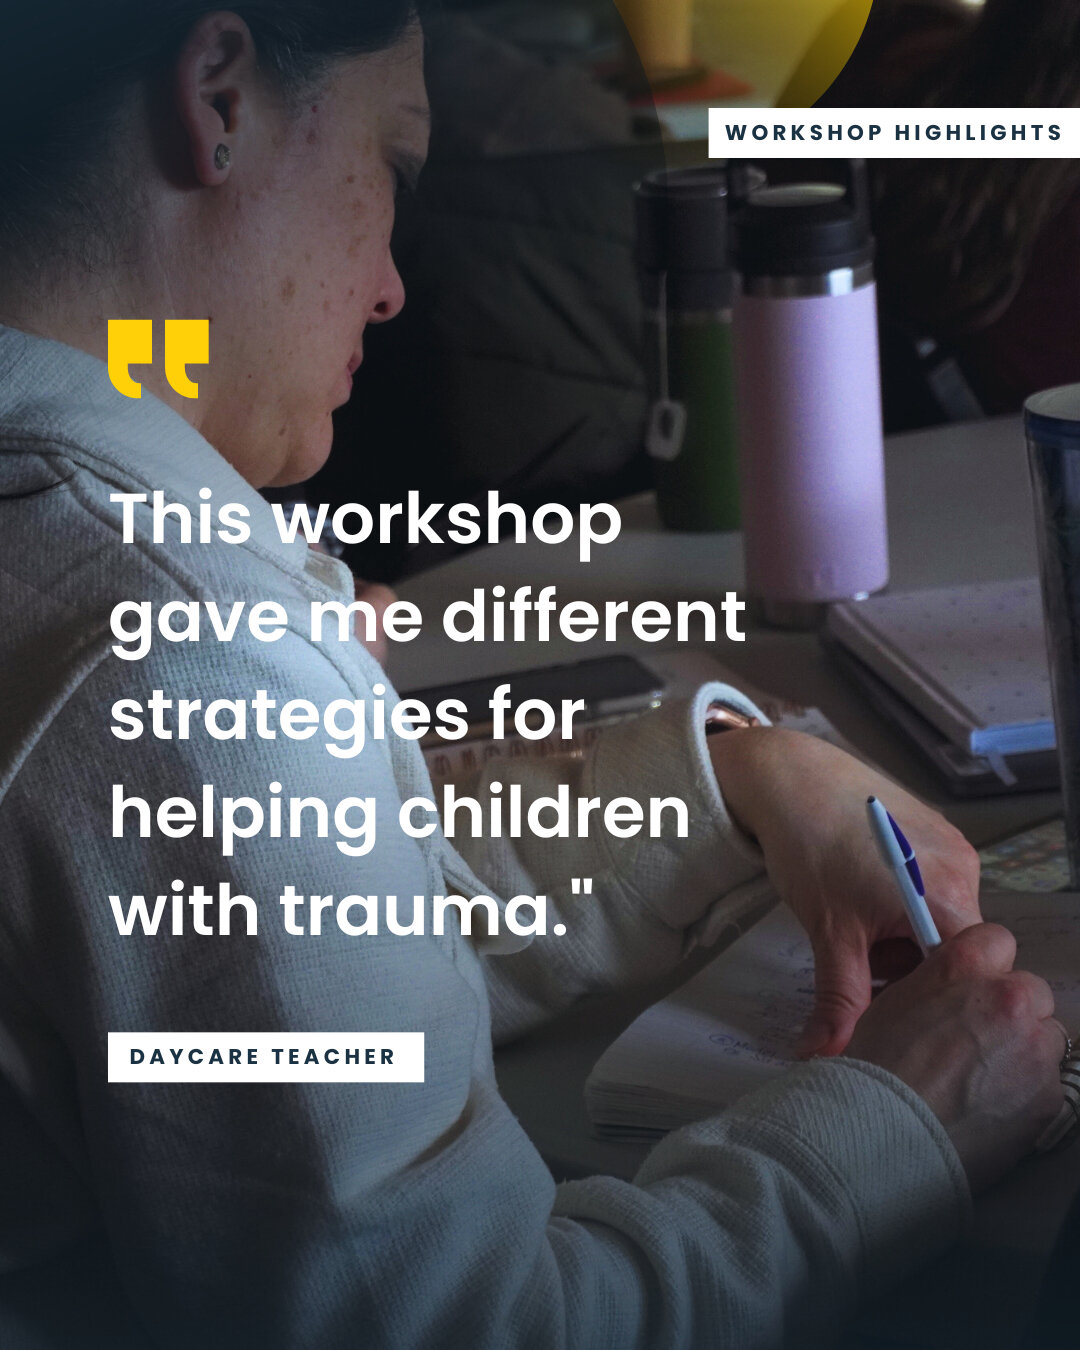 We hear first-hand from educators how challenging it is to support children with trauma backgrounds, while still caring for all the kids in their classroom.​​​​​​​​​
This fall we are planning to host pro-d workshops to equip educators and school staf